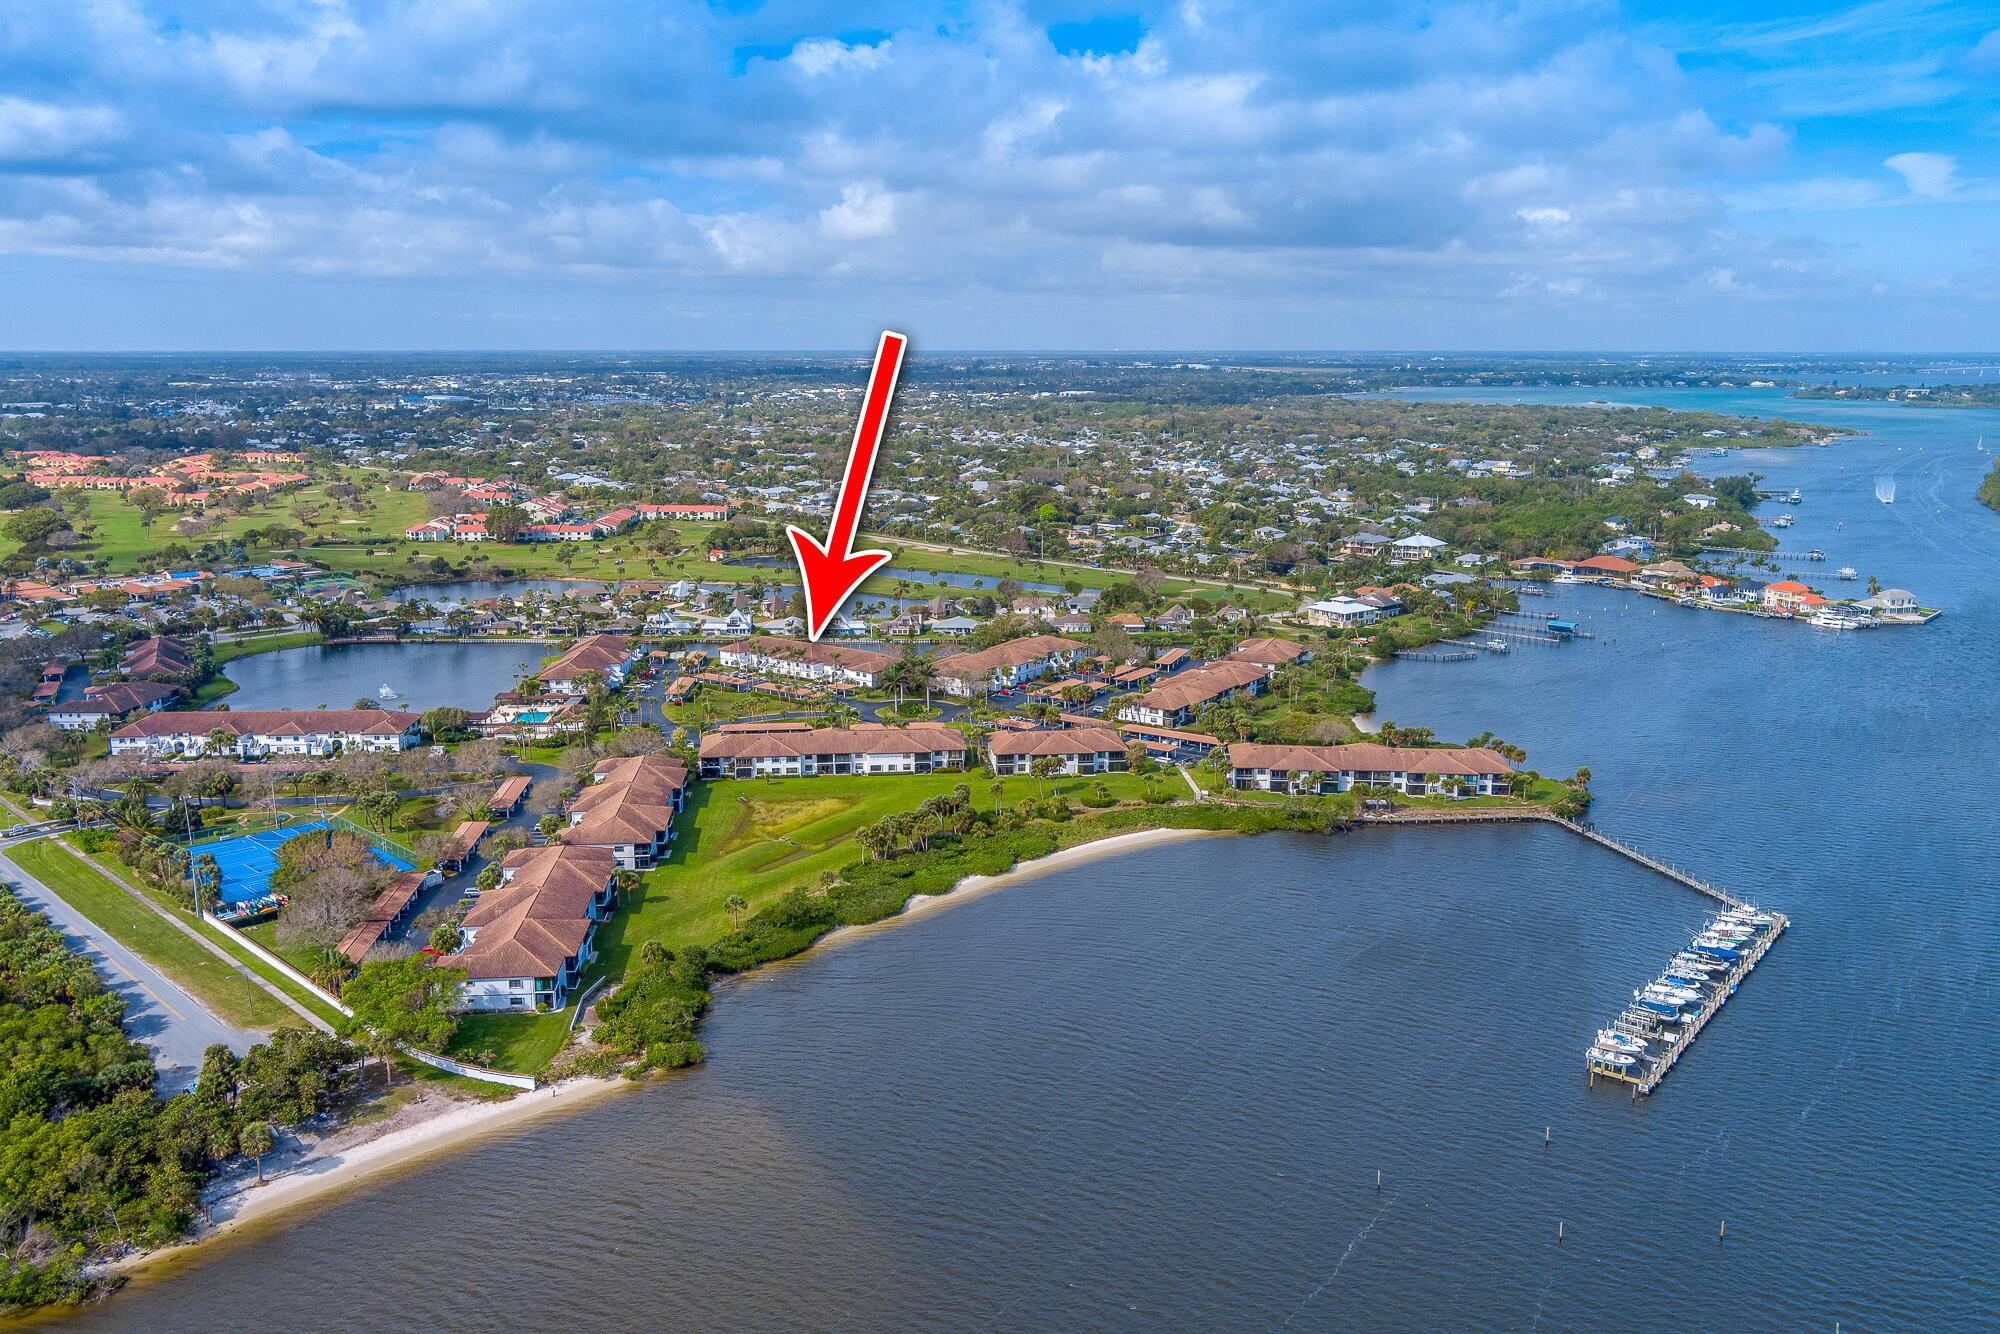 Discover waterfront living at its finest in this beautifully updated ground floor condo nestled in the picturesque community of Hanson's Landing between Miles Grant and the Intracoastal Waterway.